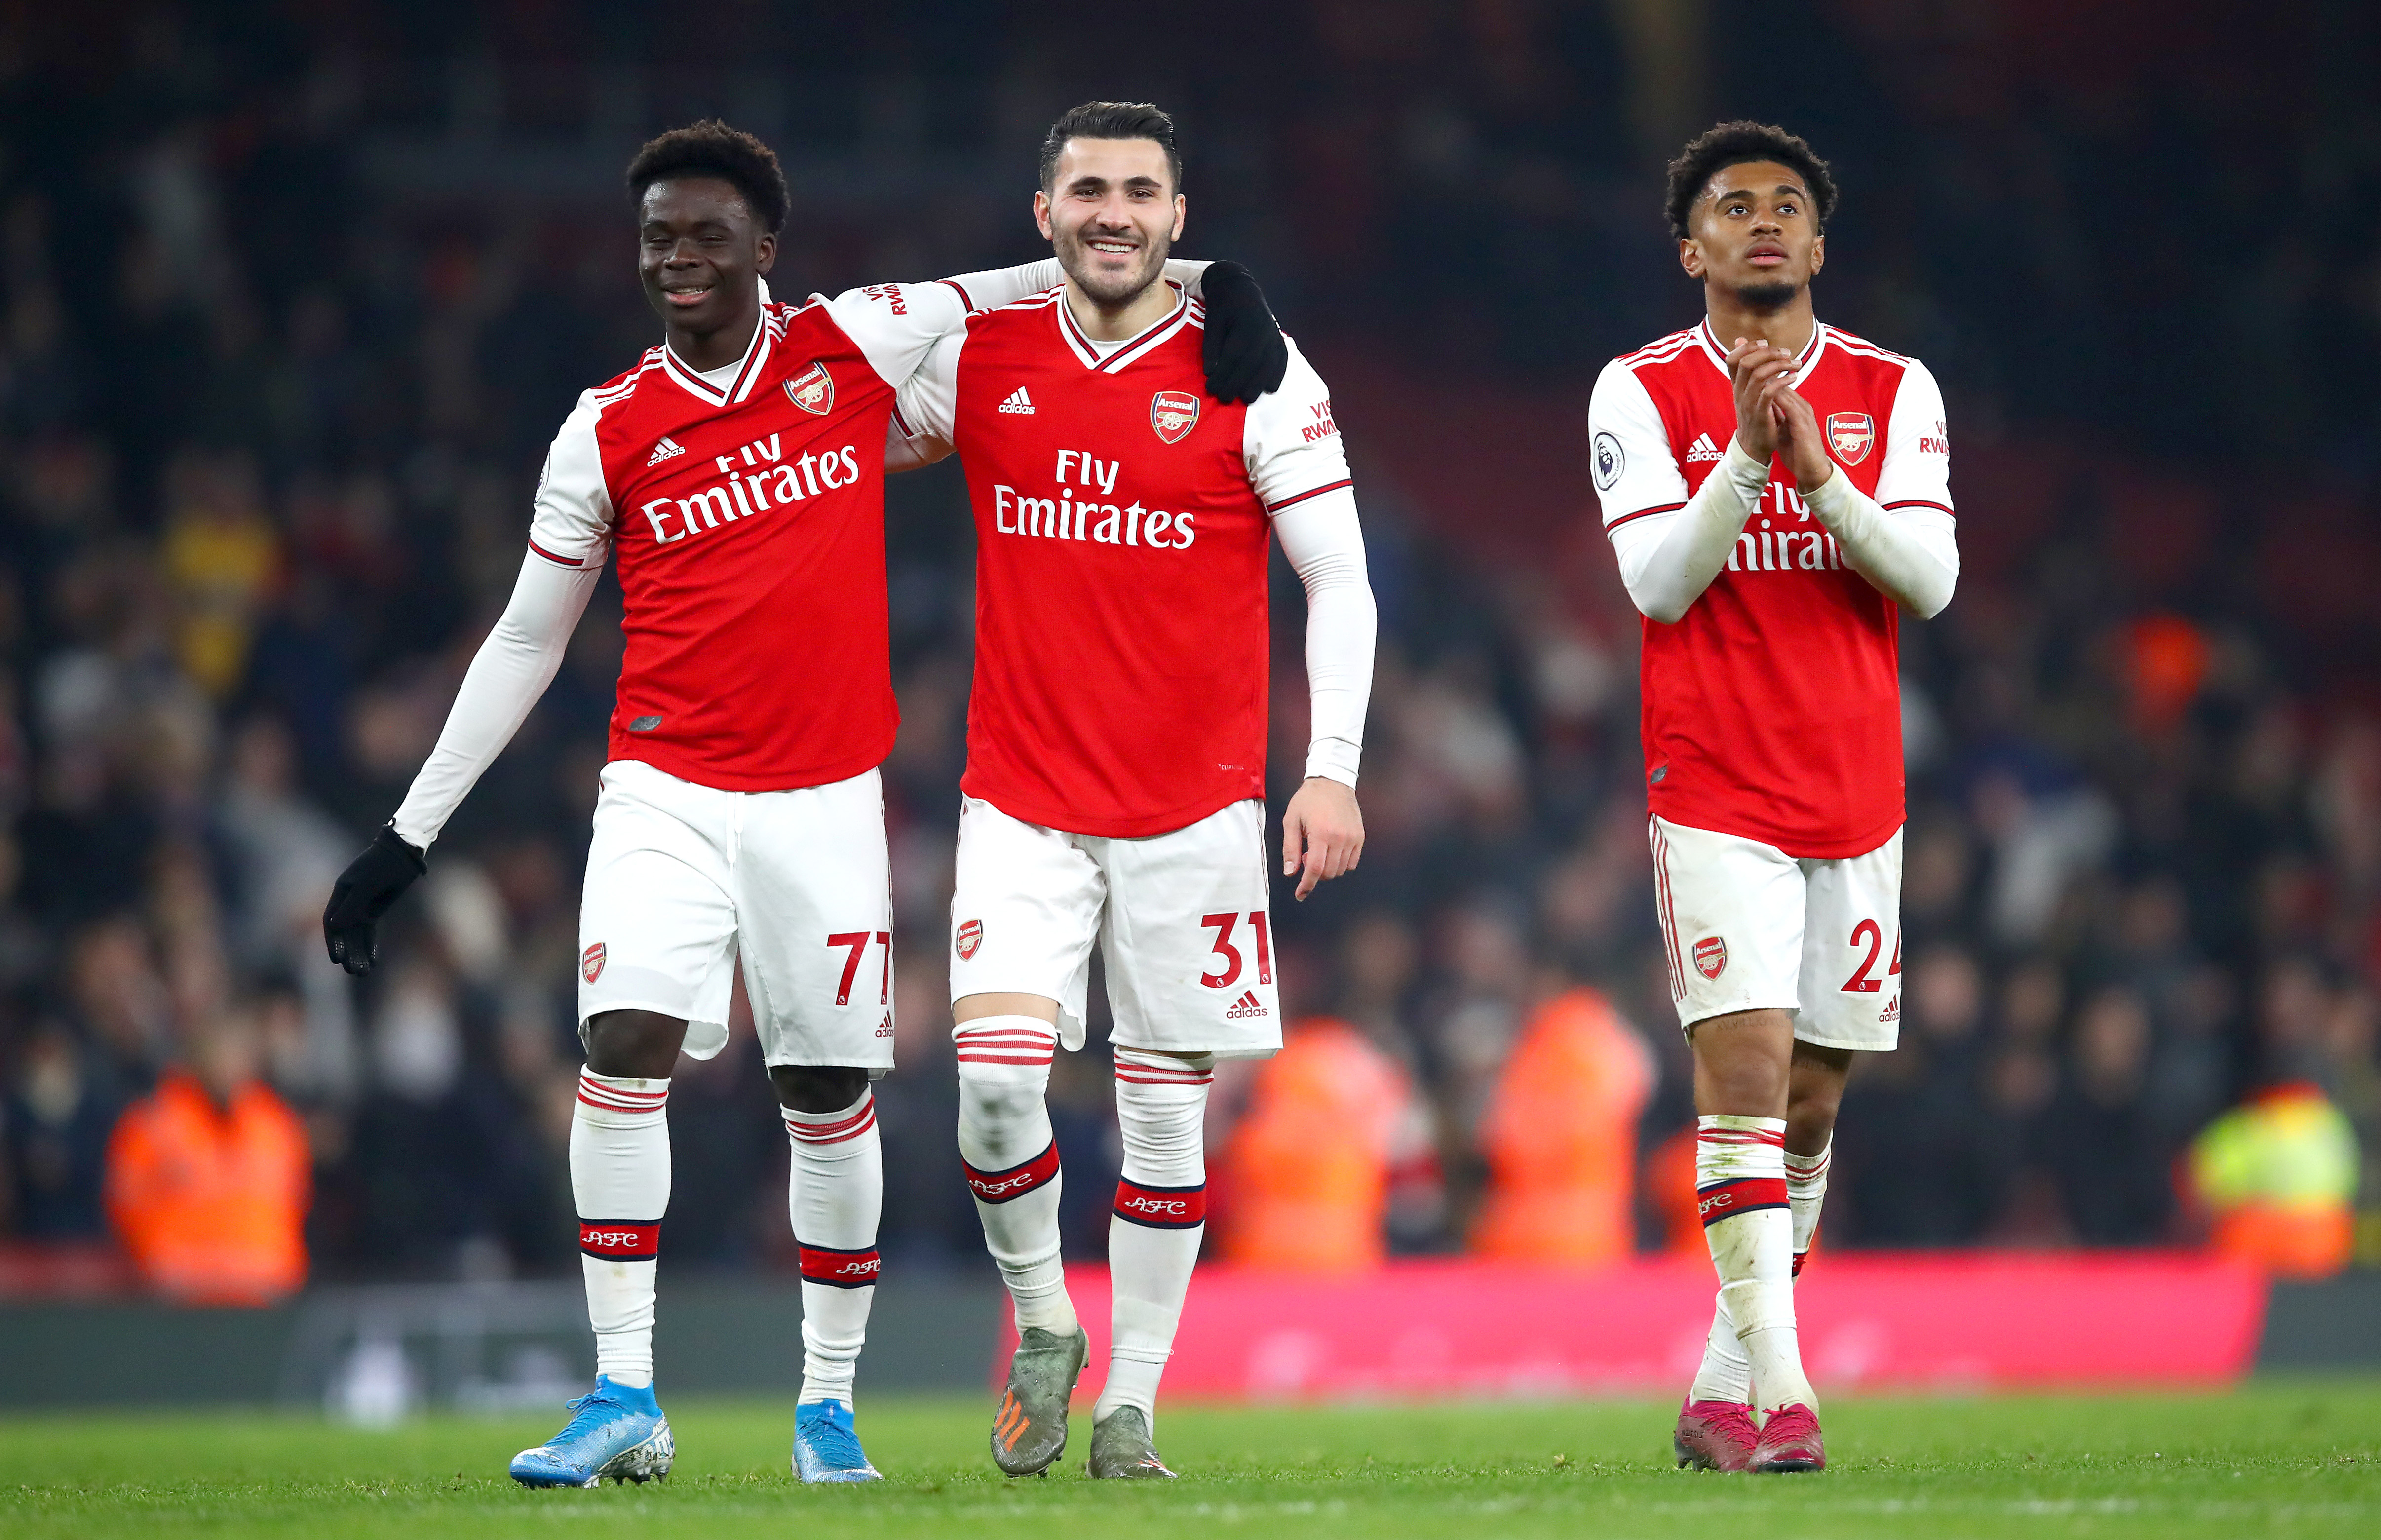 Bukayo Saka (L) could be replaced by the fit-again Sead Kolasinac (C) while Reiss Nelson (R) has also regained fitness. (Photo by Julian Finney/Getty Images)